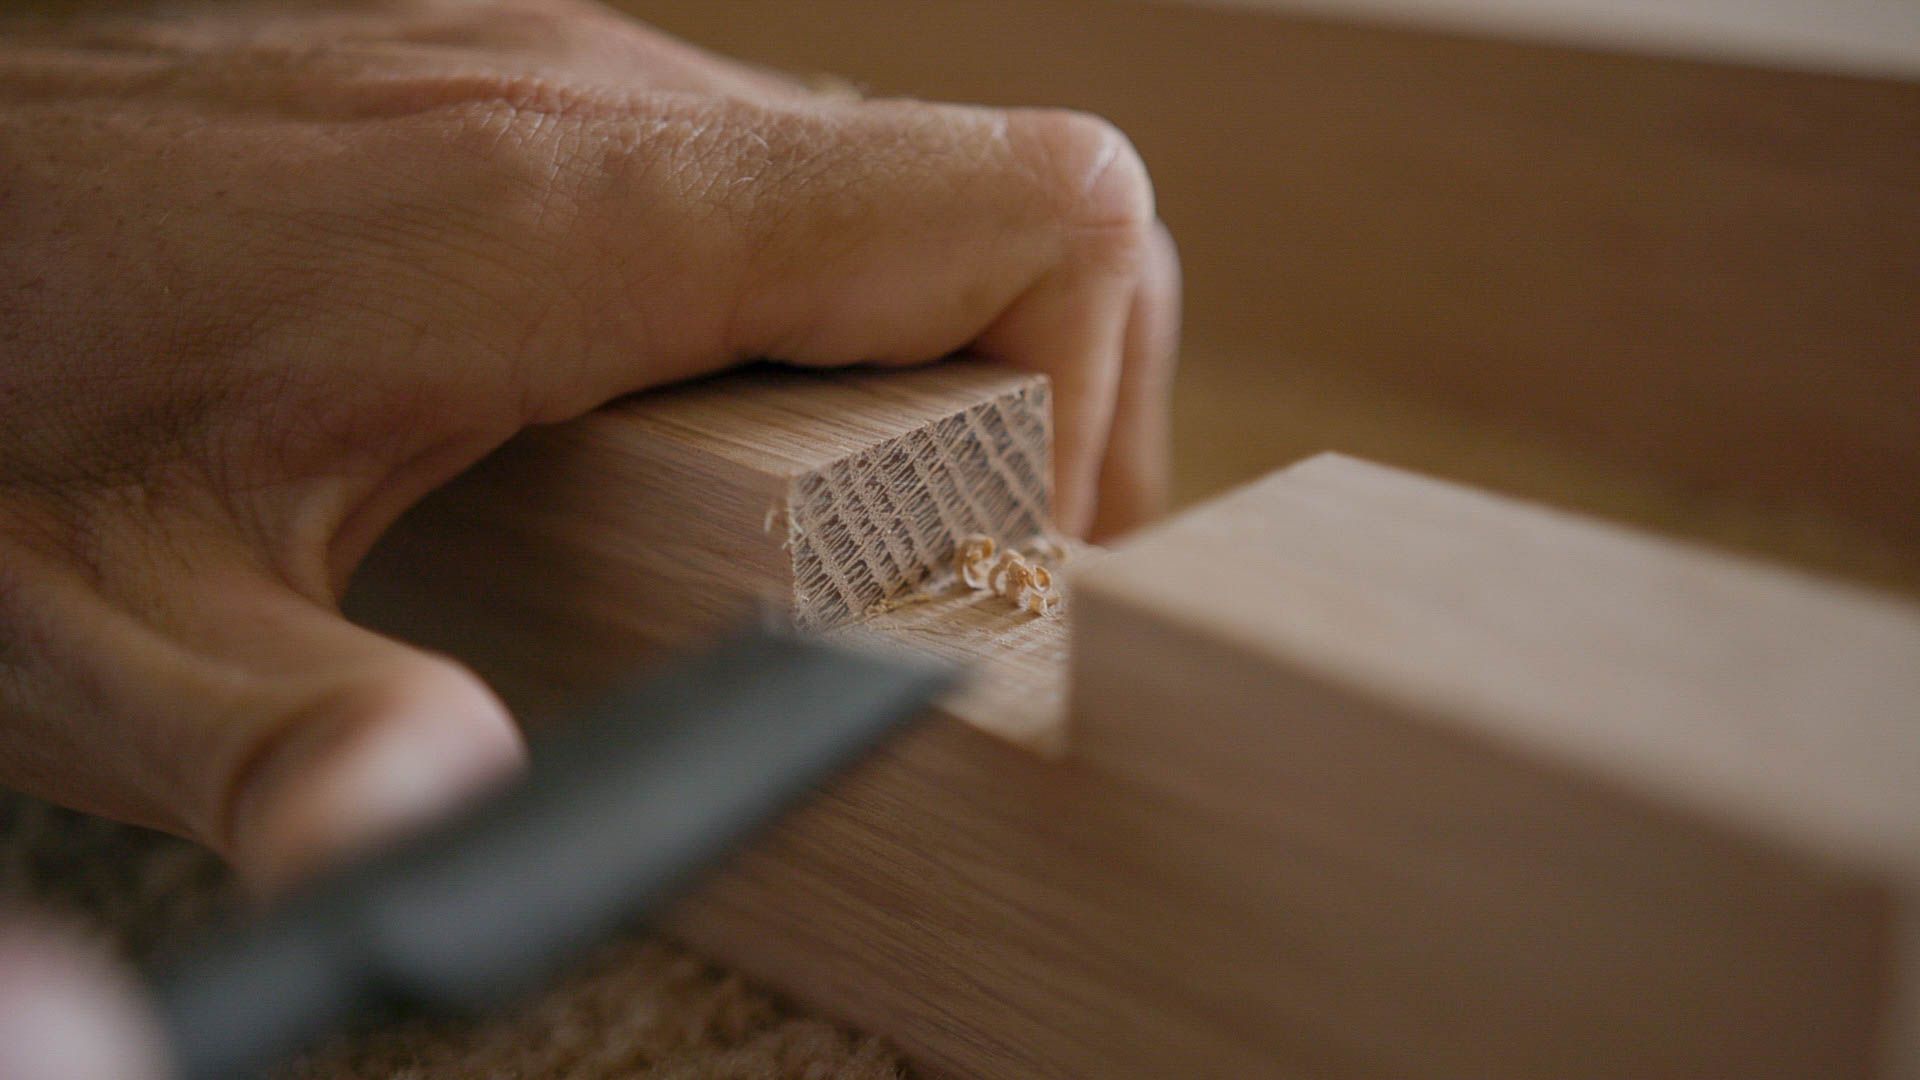 A close-up shot of hands skillfully working on a wooden block, using a sharp chisel to carve or shape it. The focused craftsmanship is evident in the fine details of the wood shavings and the precision of the tool. The background is softly blurred, emphasising the main activity.